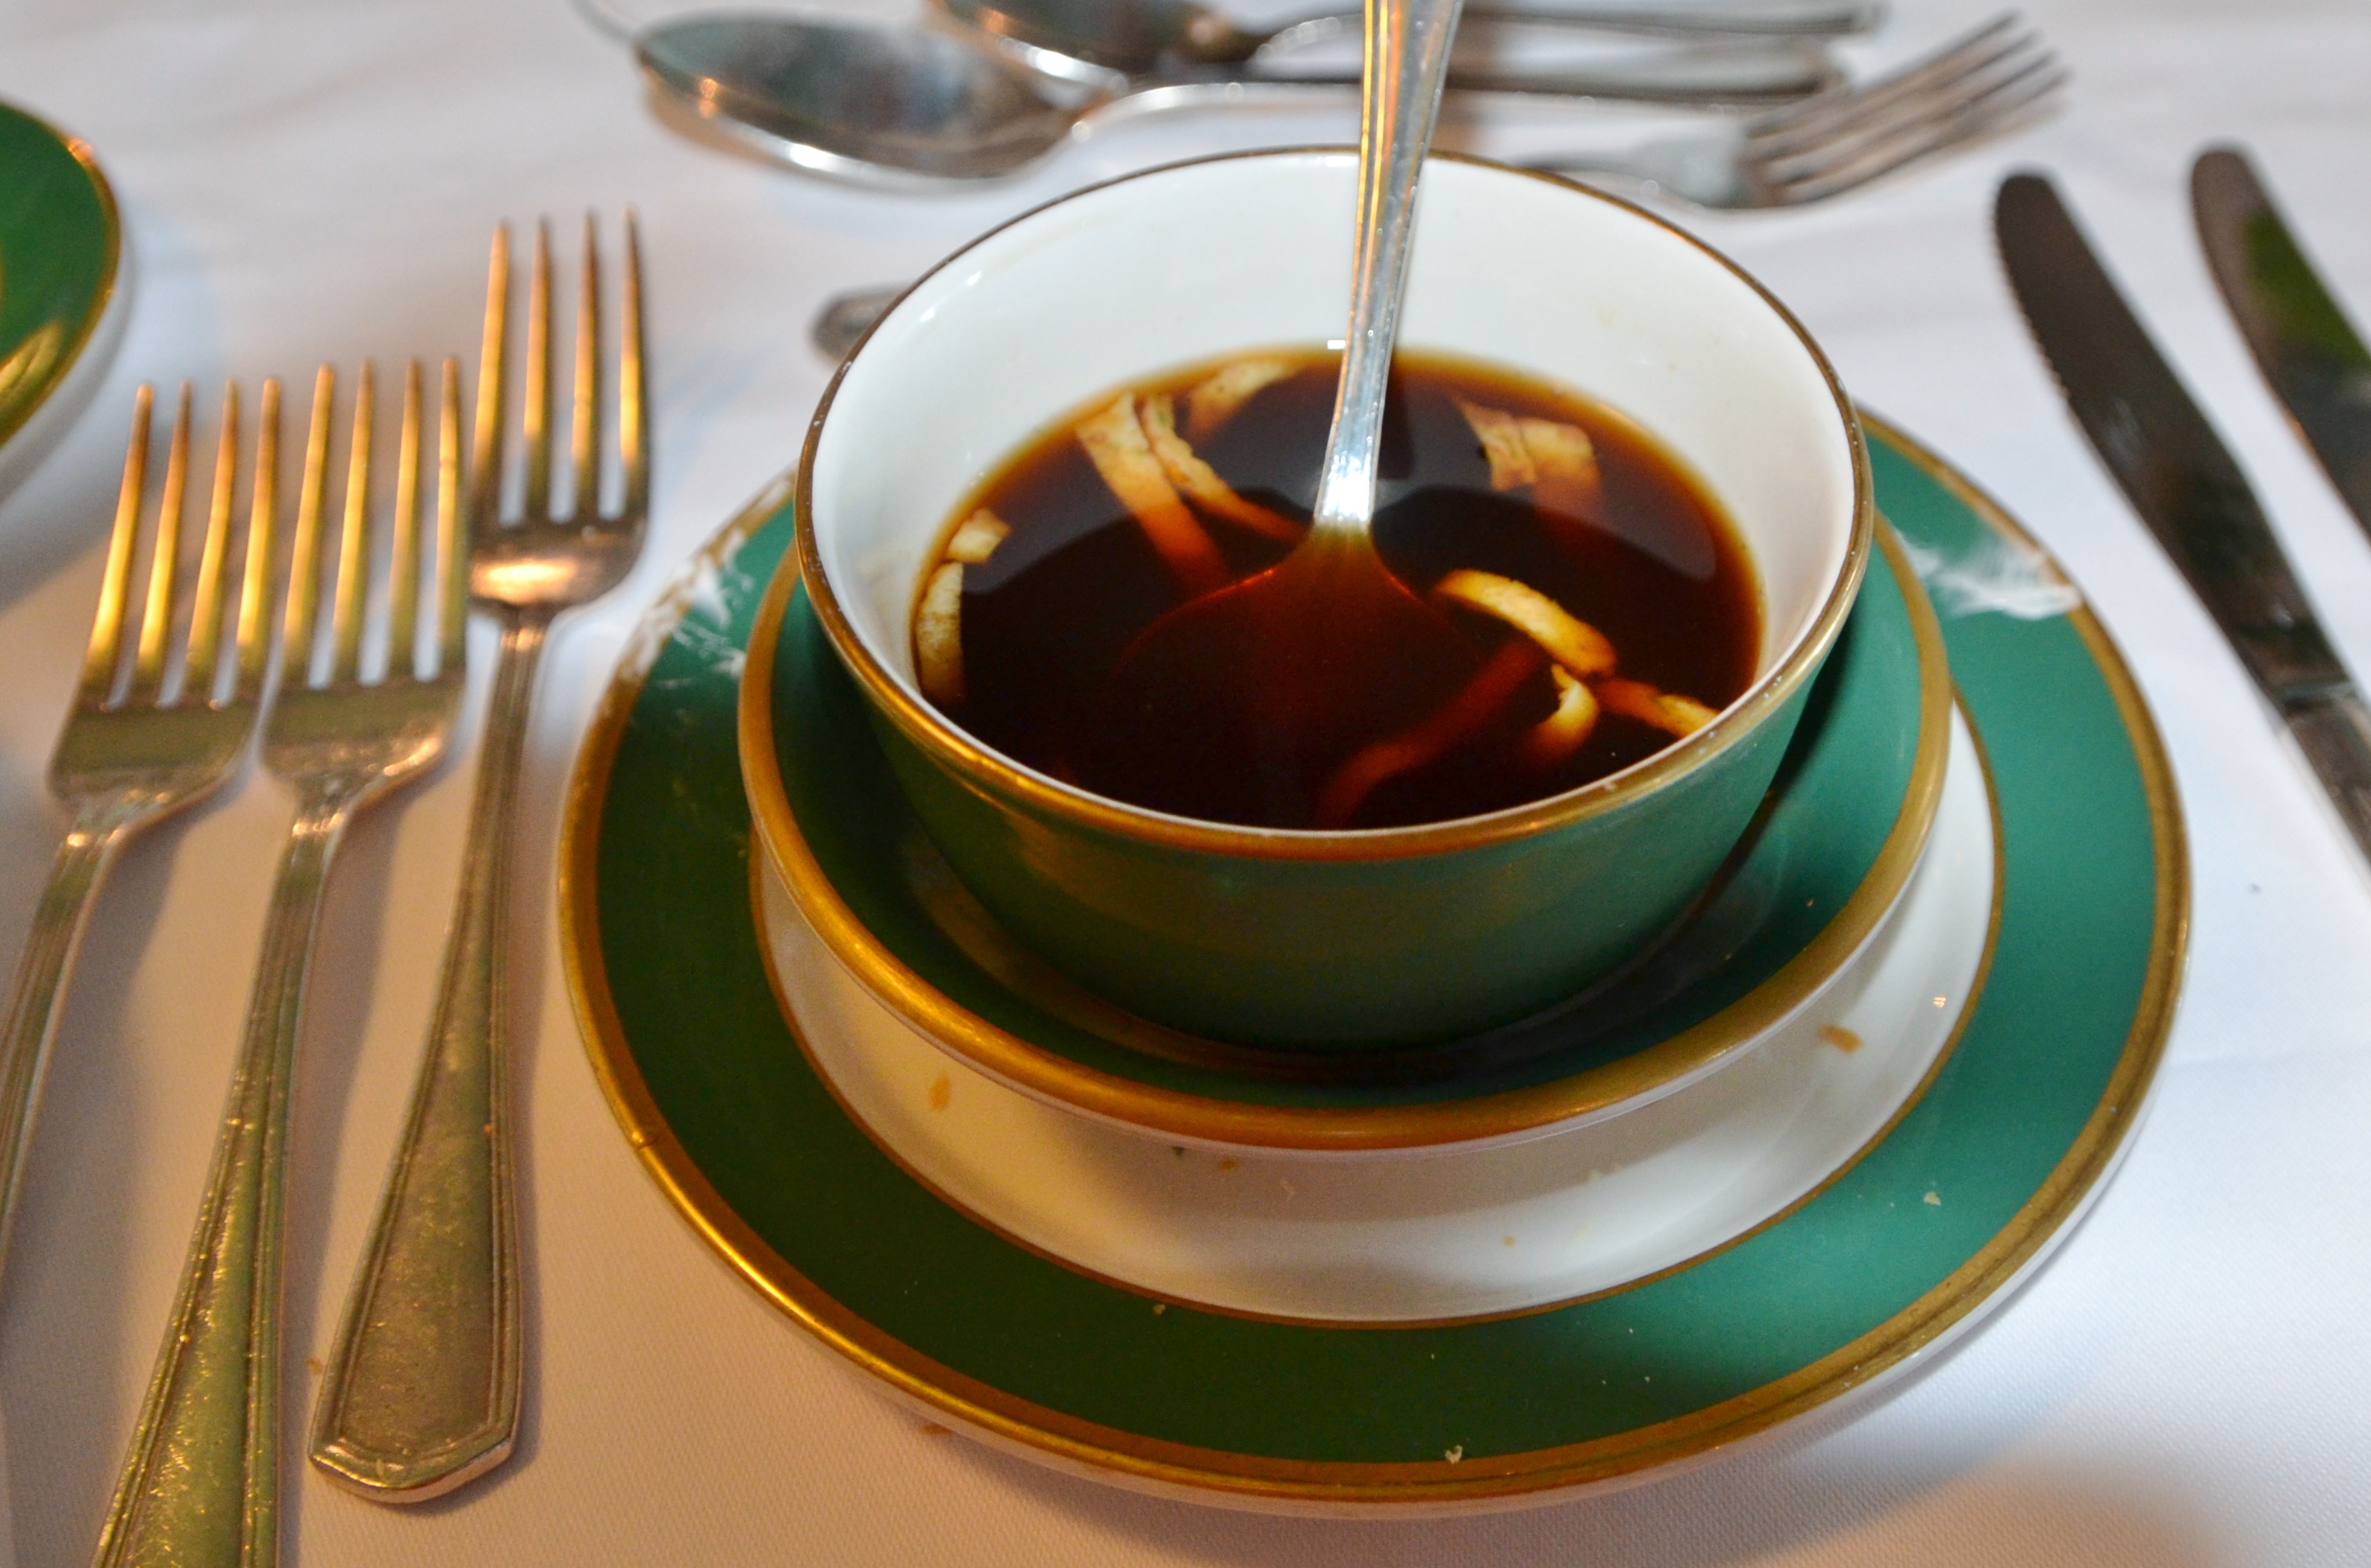 Roasted Beef Broth at the Grand Hotel on Mackinac Island